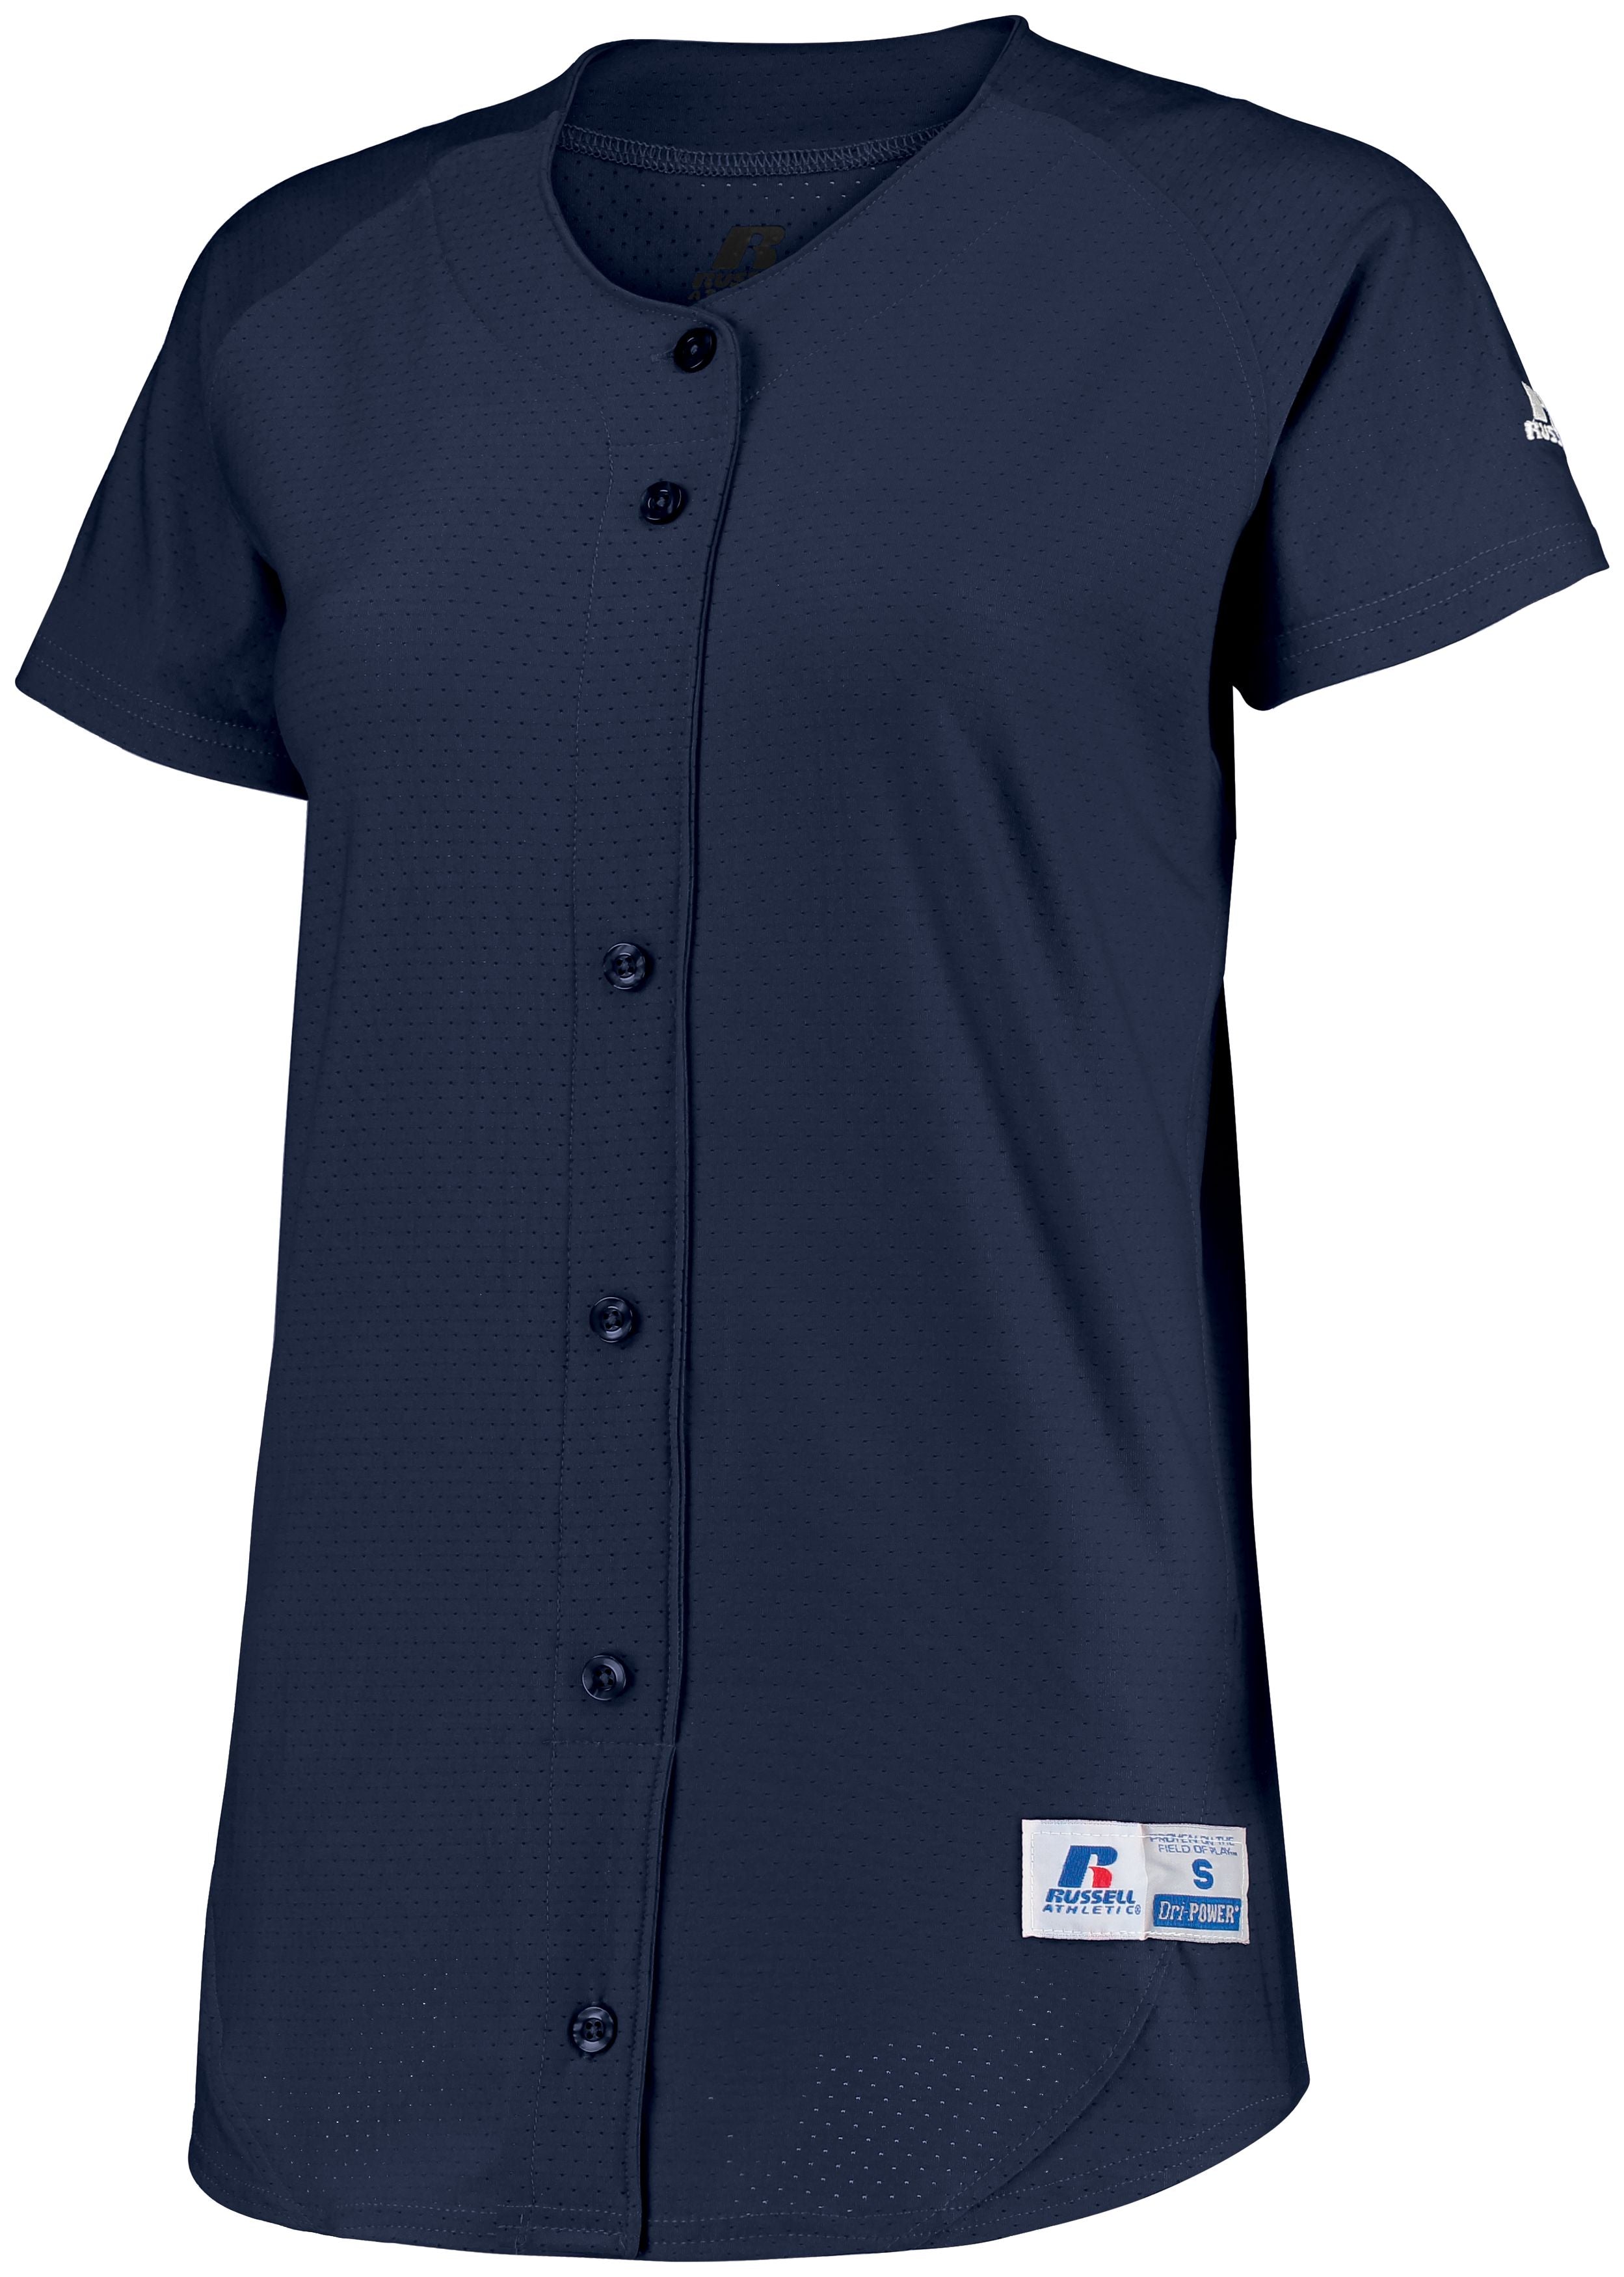 Russell Athletic Ladies Stretch Faux Button Jersey in Navy  -Part of the Ladies, Ladies-Jersey, Softball, Russell-Athletic-Products, Shirts product lines at KanaleyCreations.com